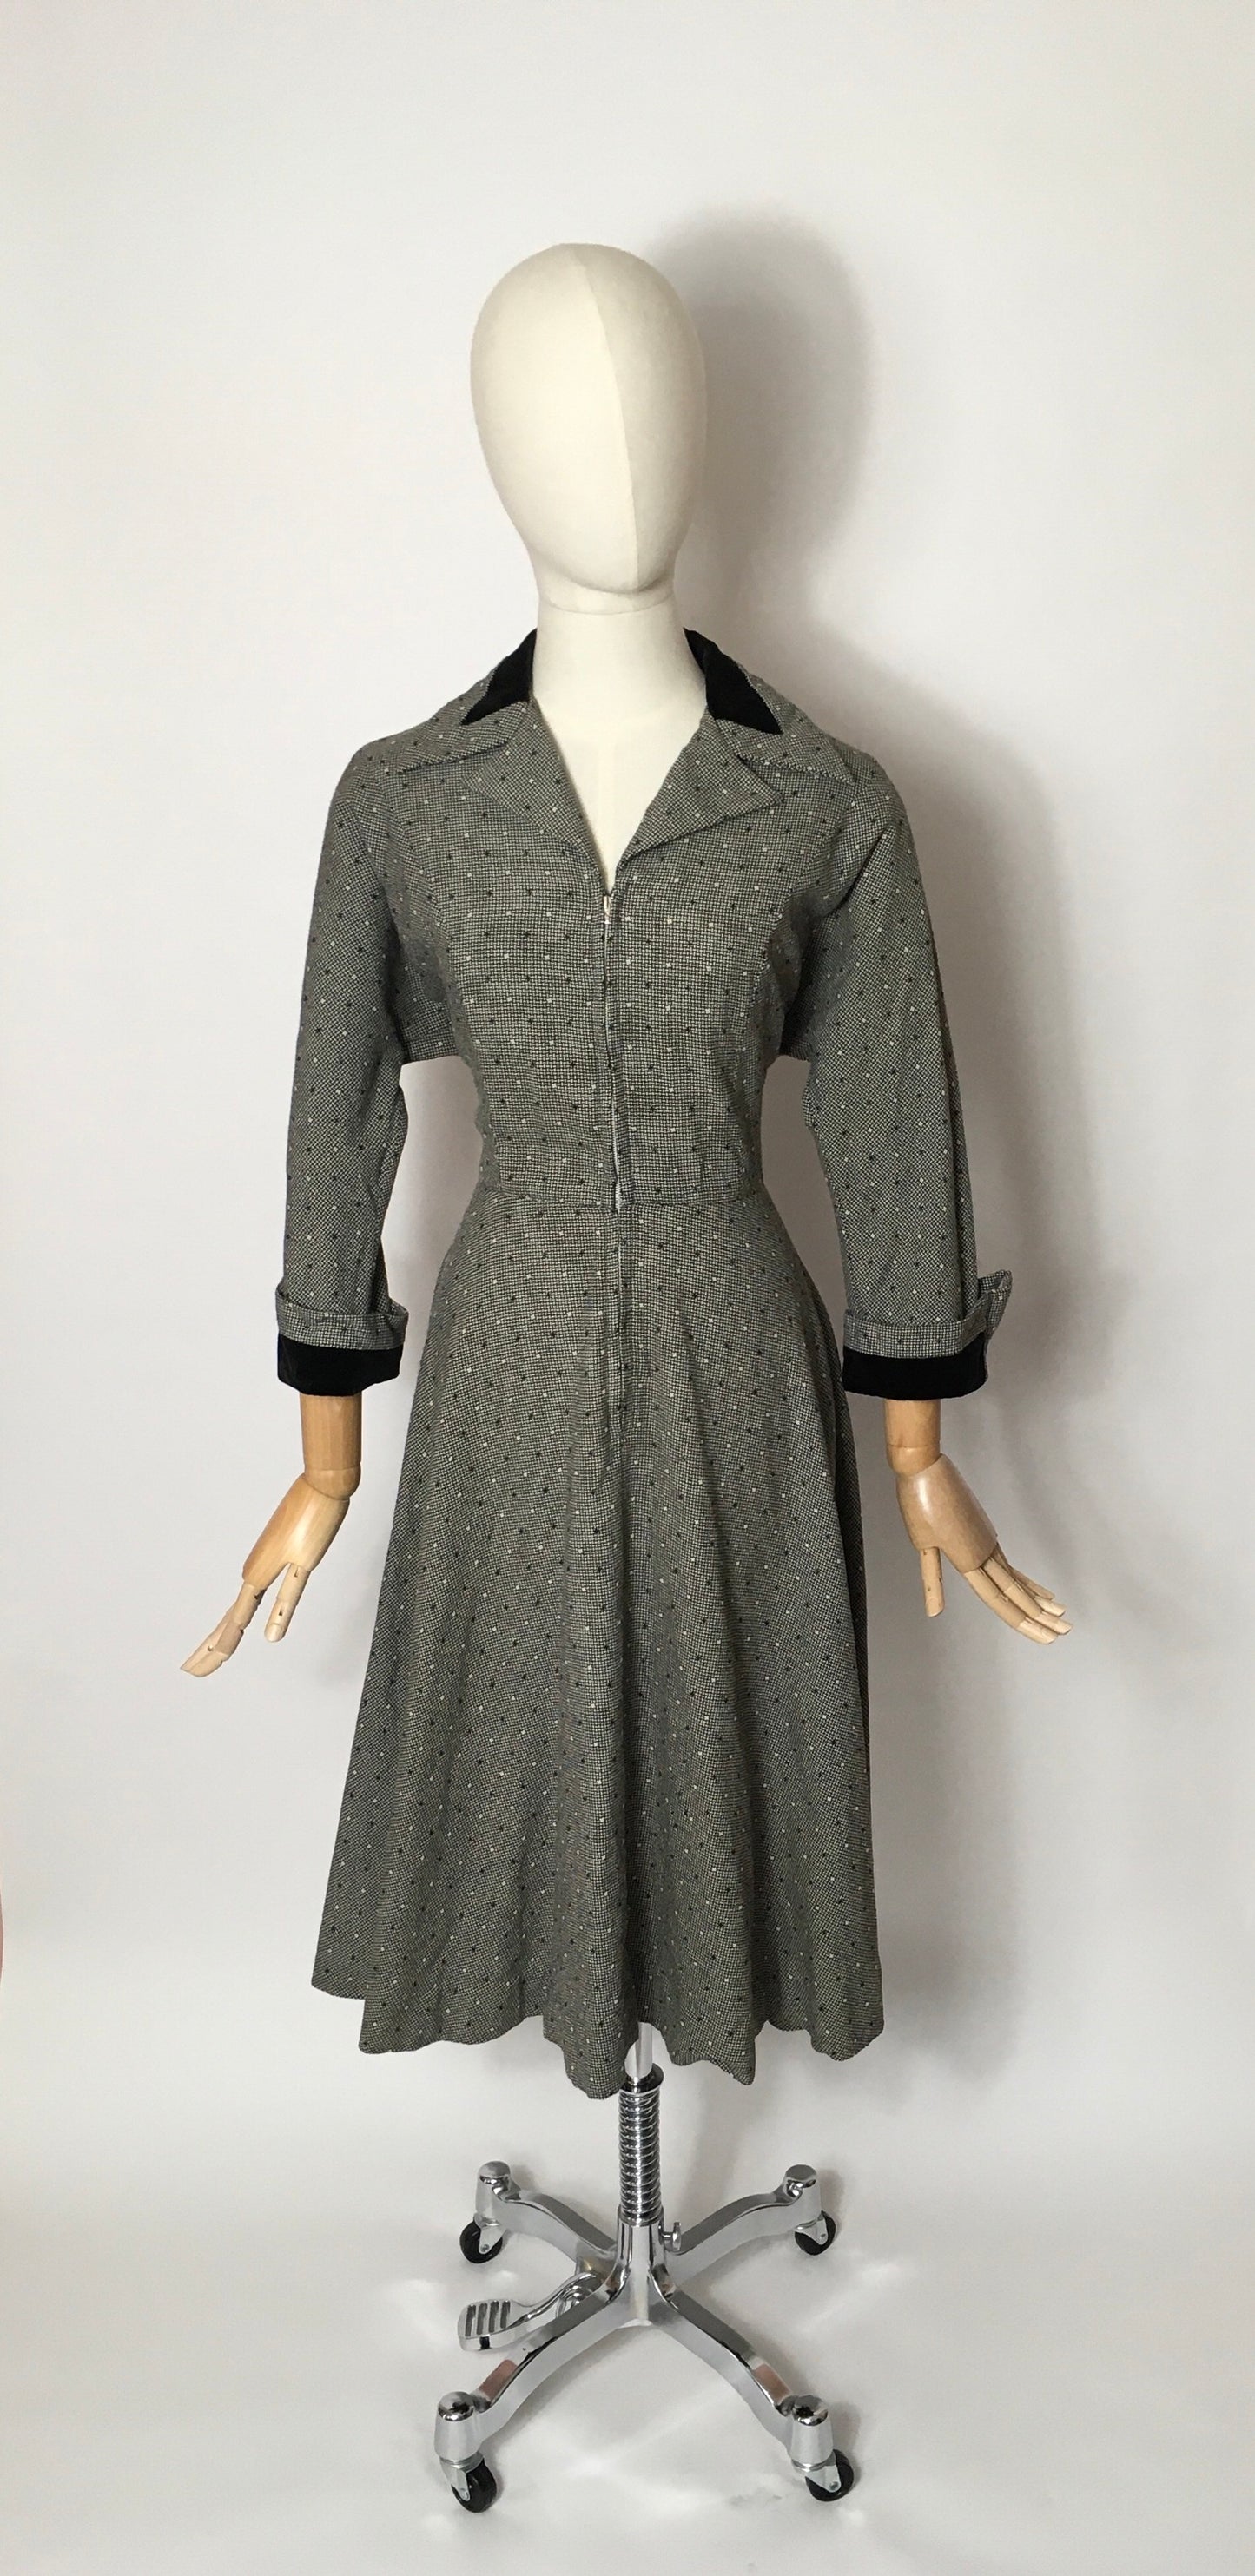 Original late 1940’s early 1950s ‘ Peggy Page ‘ Dress - Stunning Velvet Trim Detailing